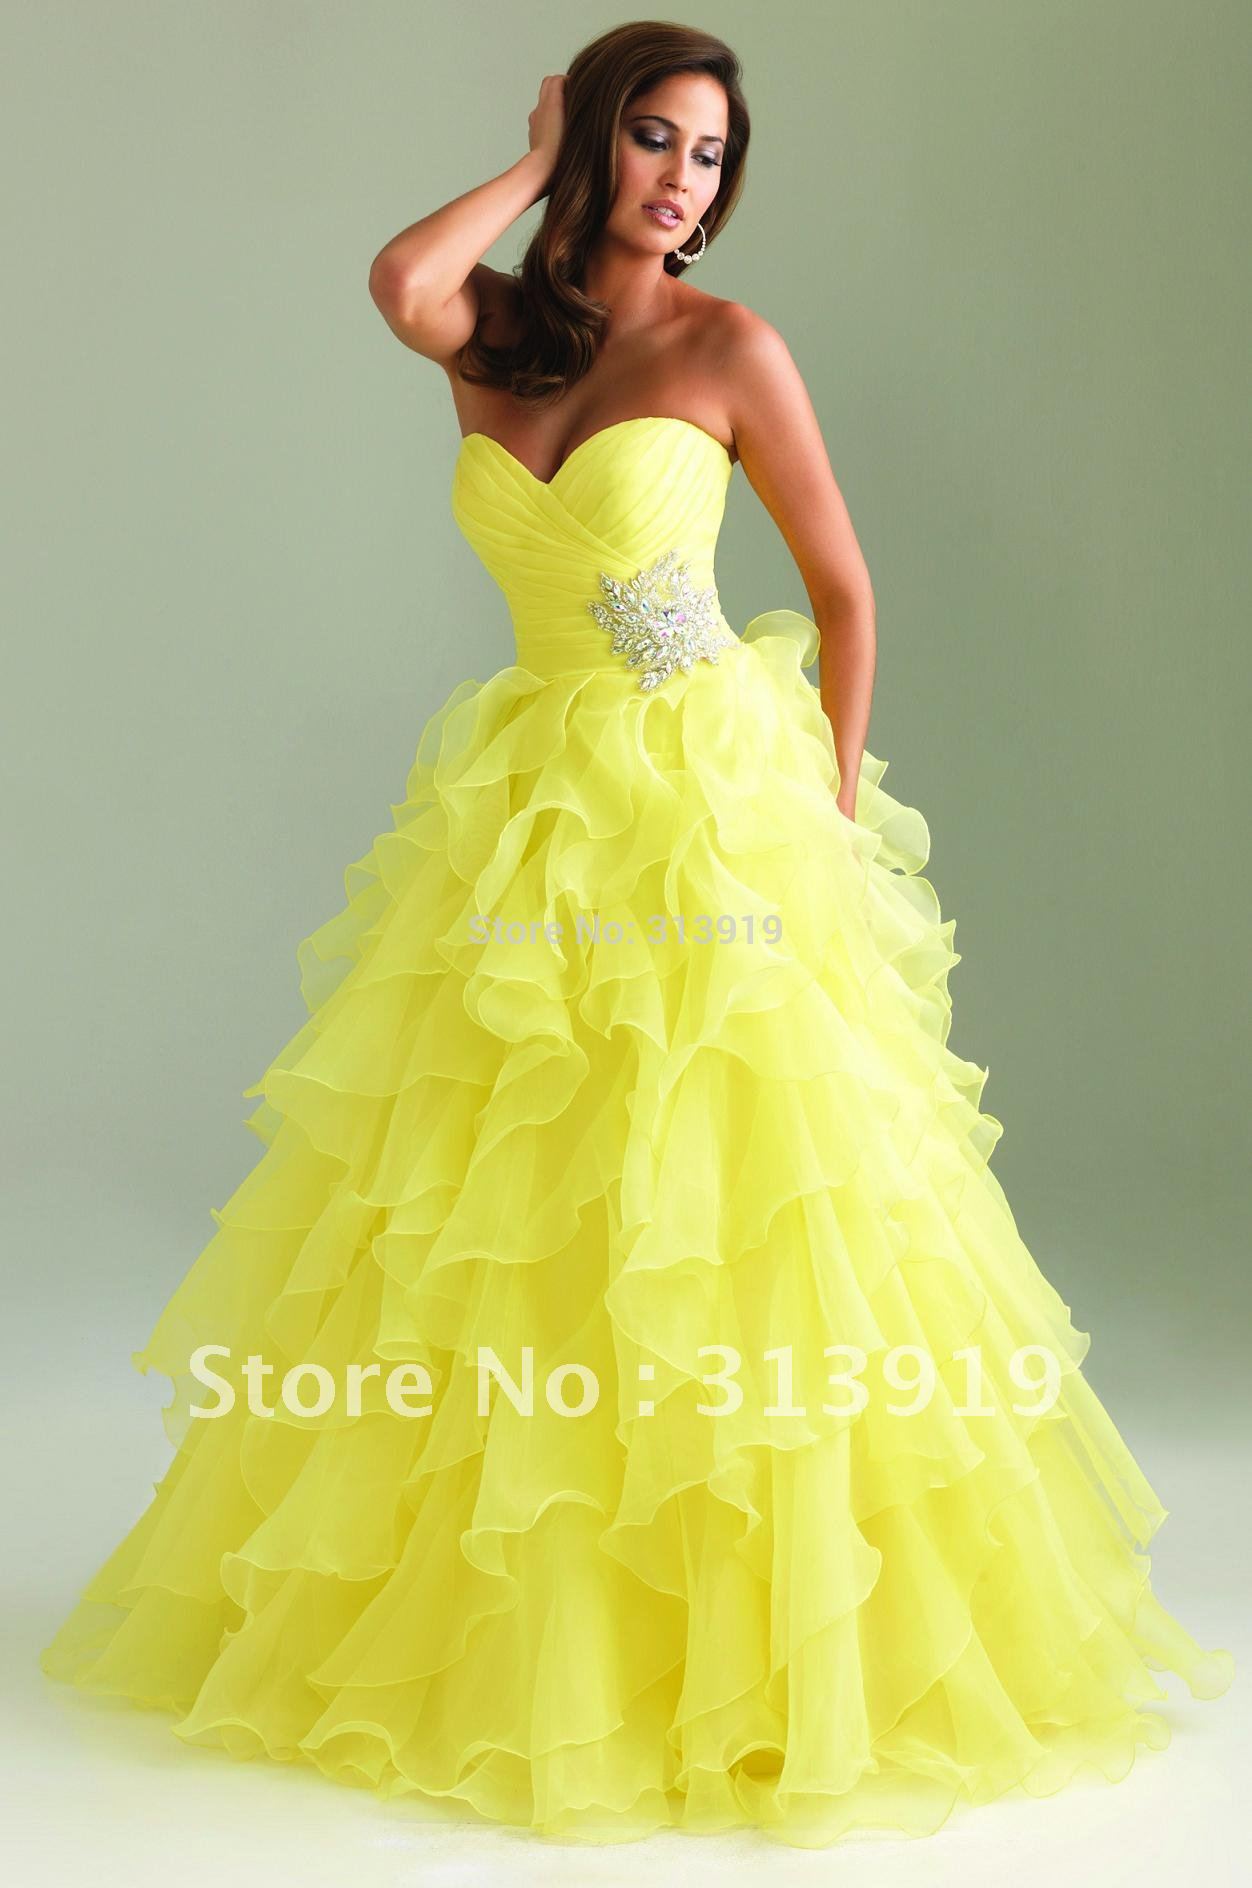 Yellow Debs Dress Online Hotsell, UP TO ...